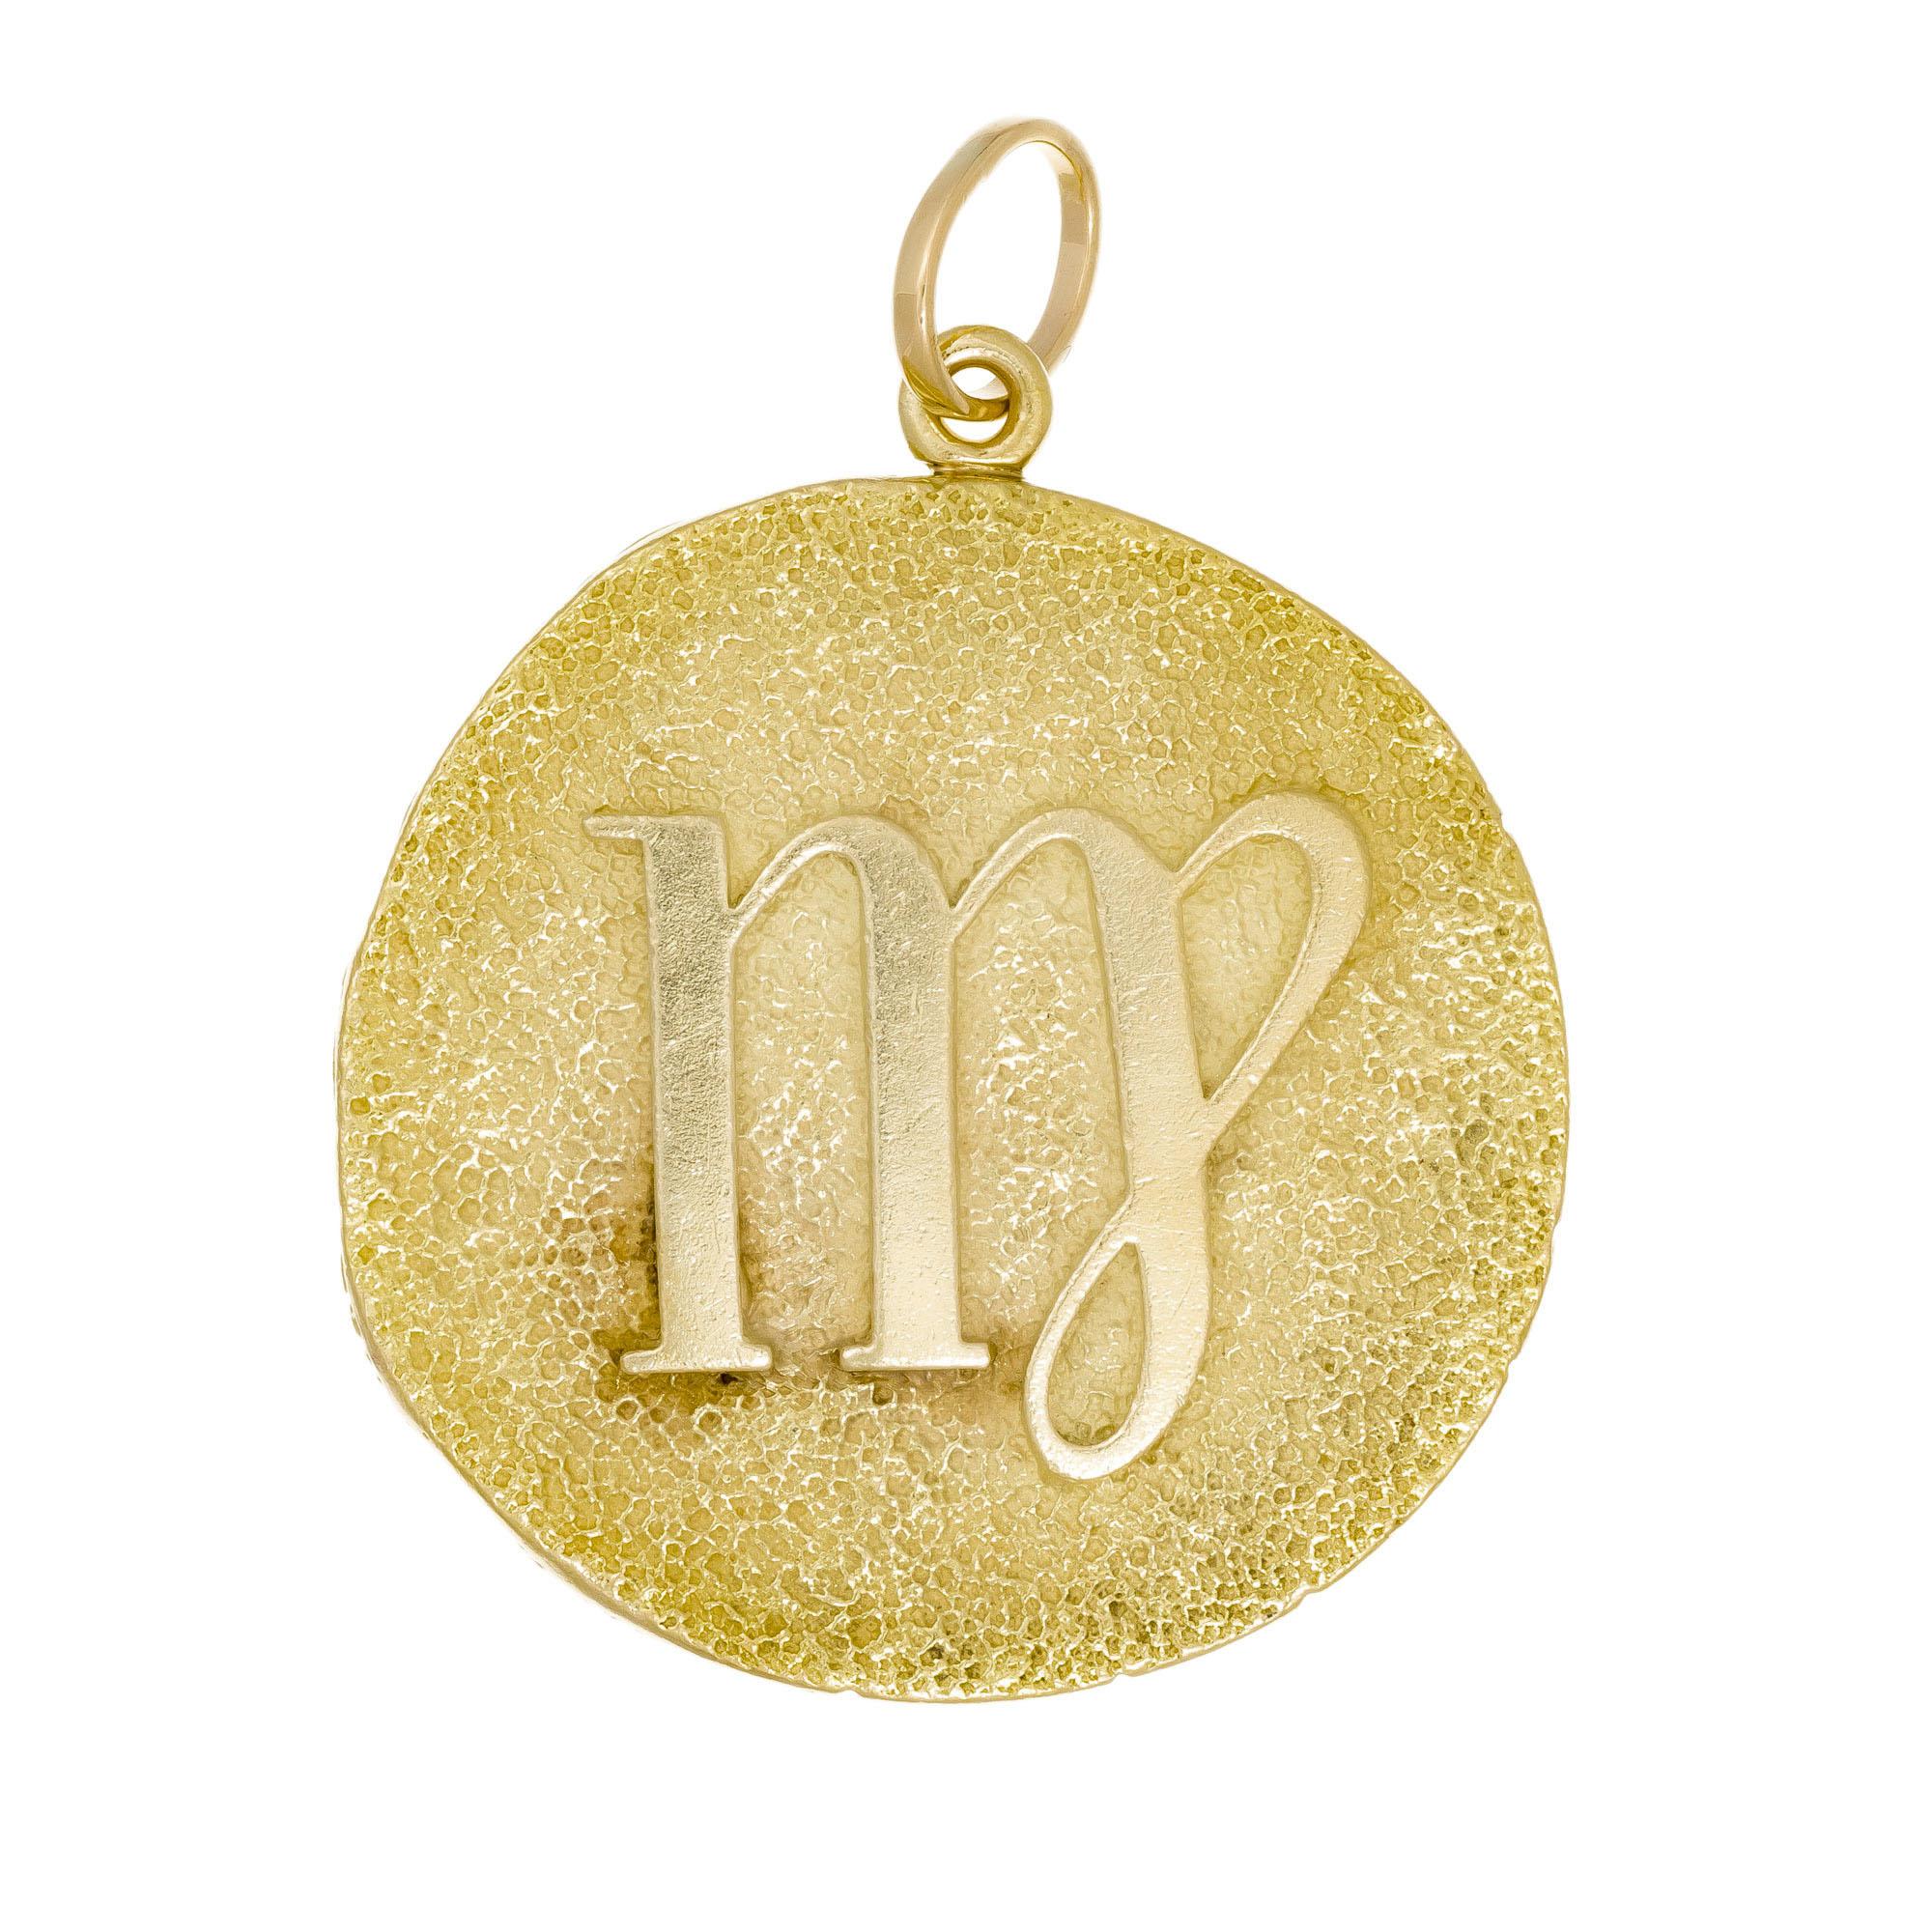 Elsa Peretti virgo large solid 18k yellow gold Virgo pendant. Marked NY on the back. Made for Tiffany & Co. NY in the 1970’s 

18k yellow gold 
Stamped: 18k
Hallmark: Tiffany Italy 
50 grams
Top to bottom: 49.7mm or 2 Inches
Width: 44.5mm or 1 ¾